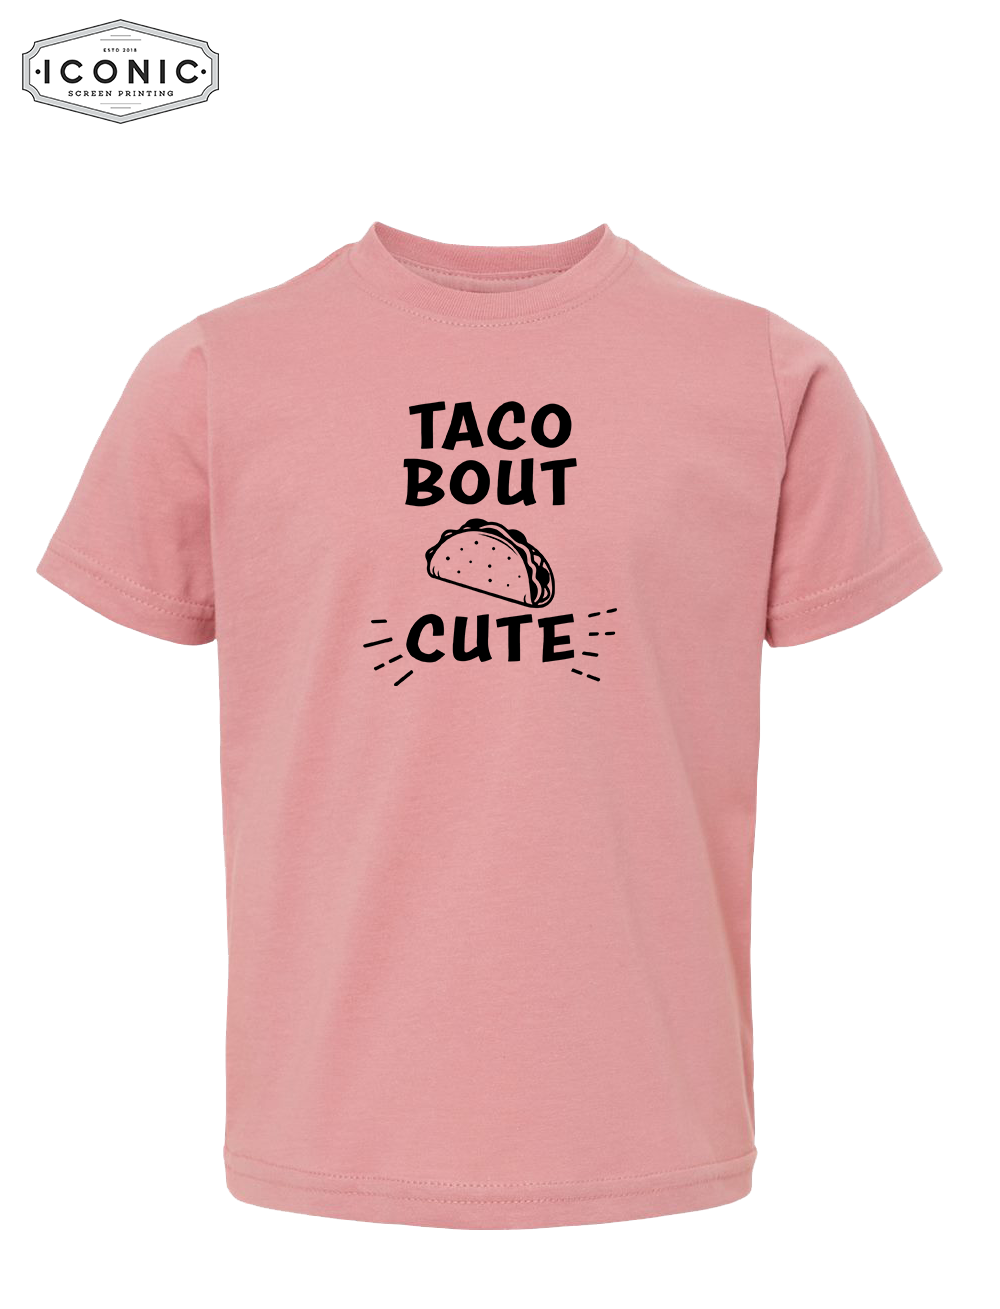 Tacobout Cute! - Toddler Fine Jersey Tee